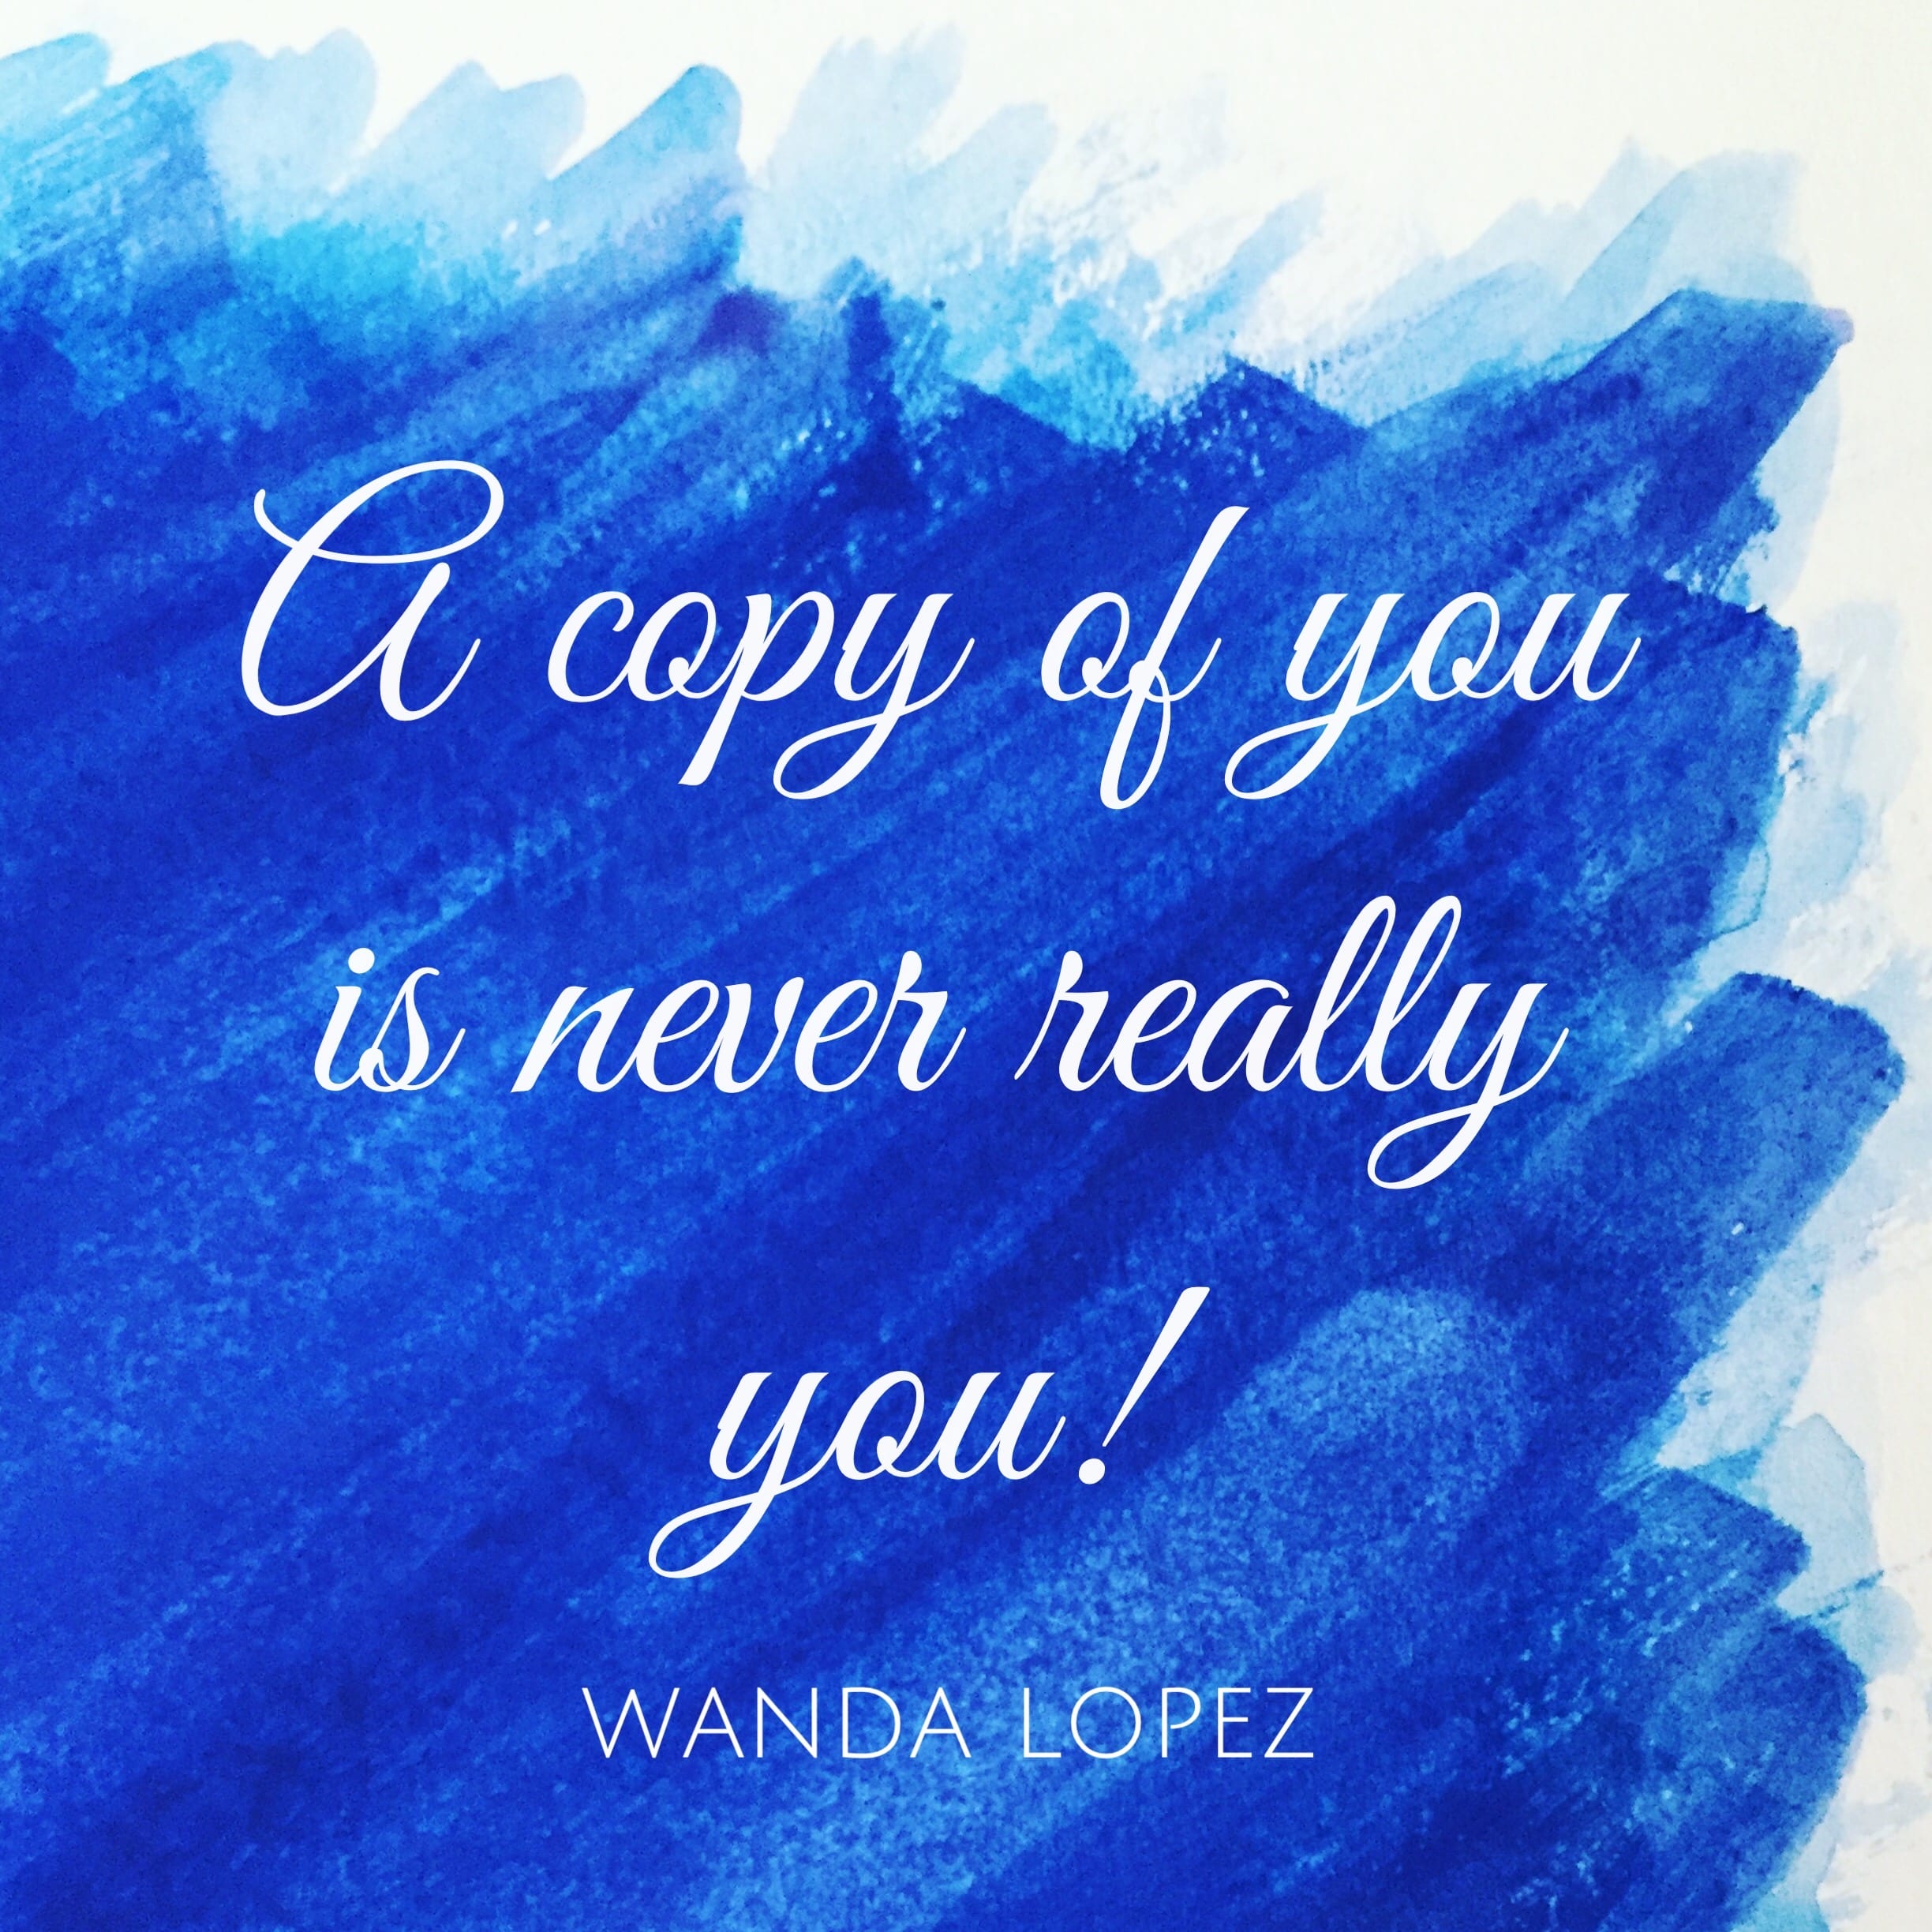 A_copy_of_you-quote_by_WLD